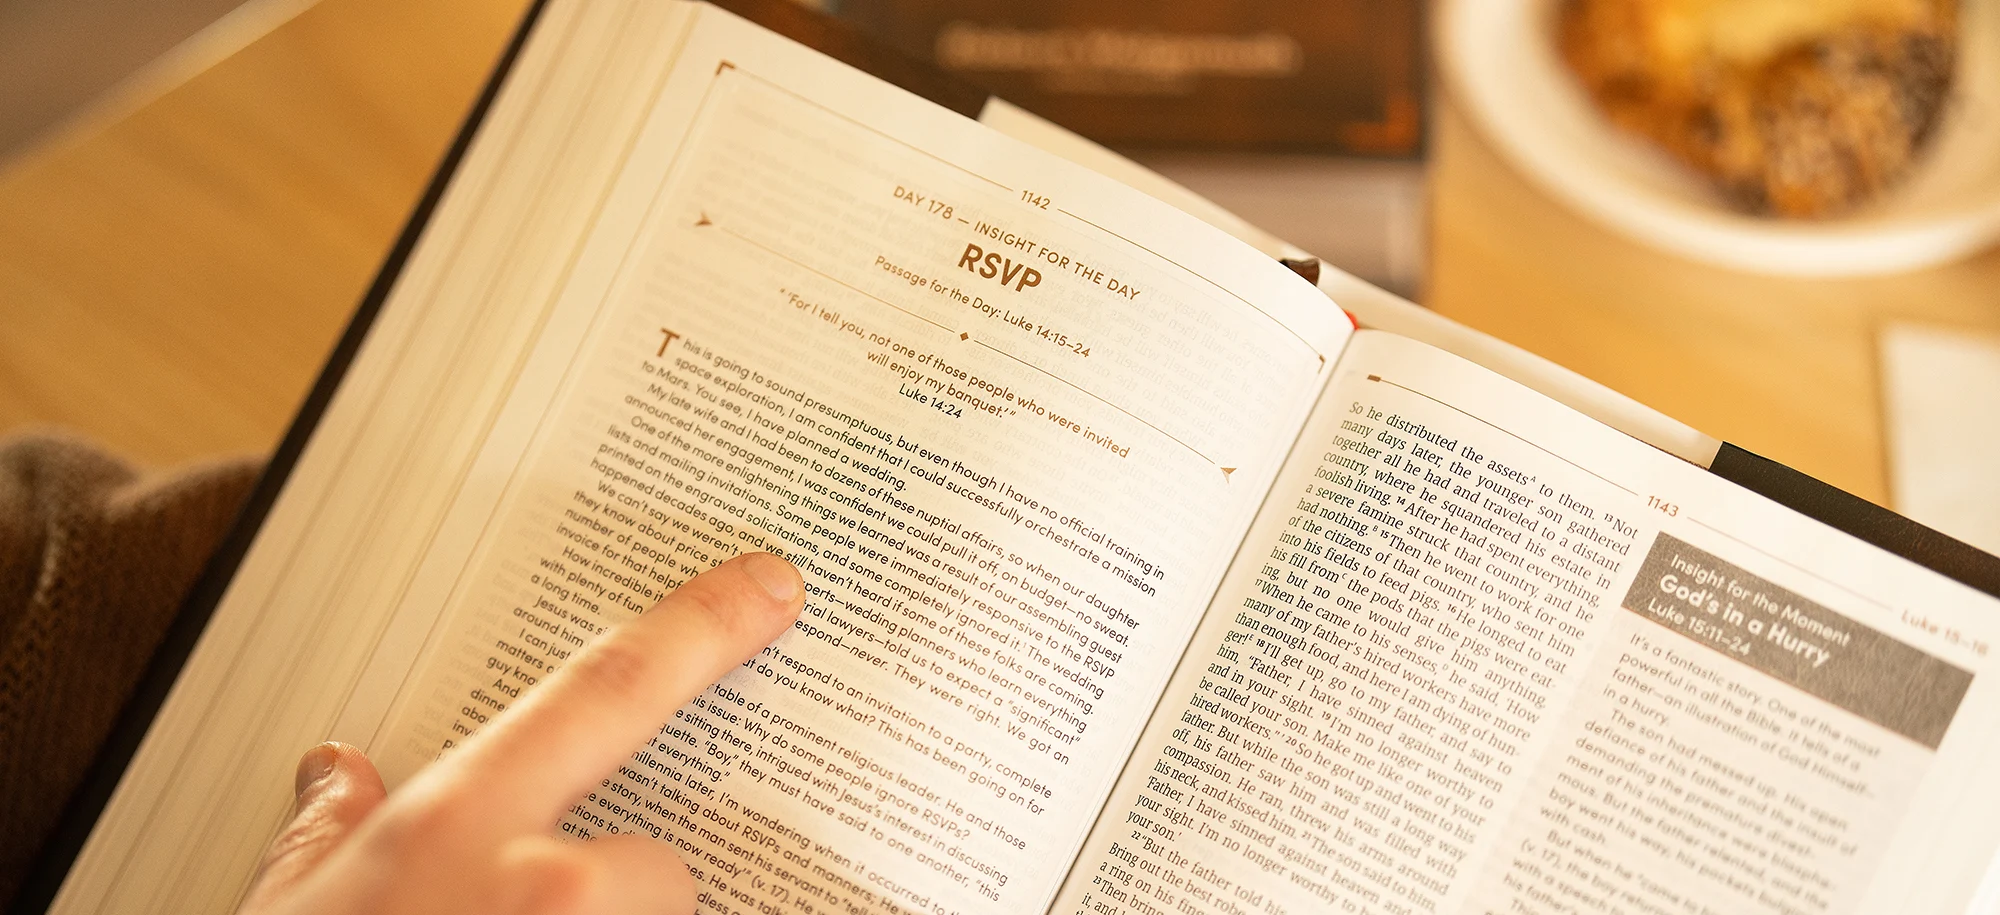 Men's Daily Bible contributors image showing pages from the Bible.